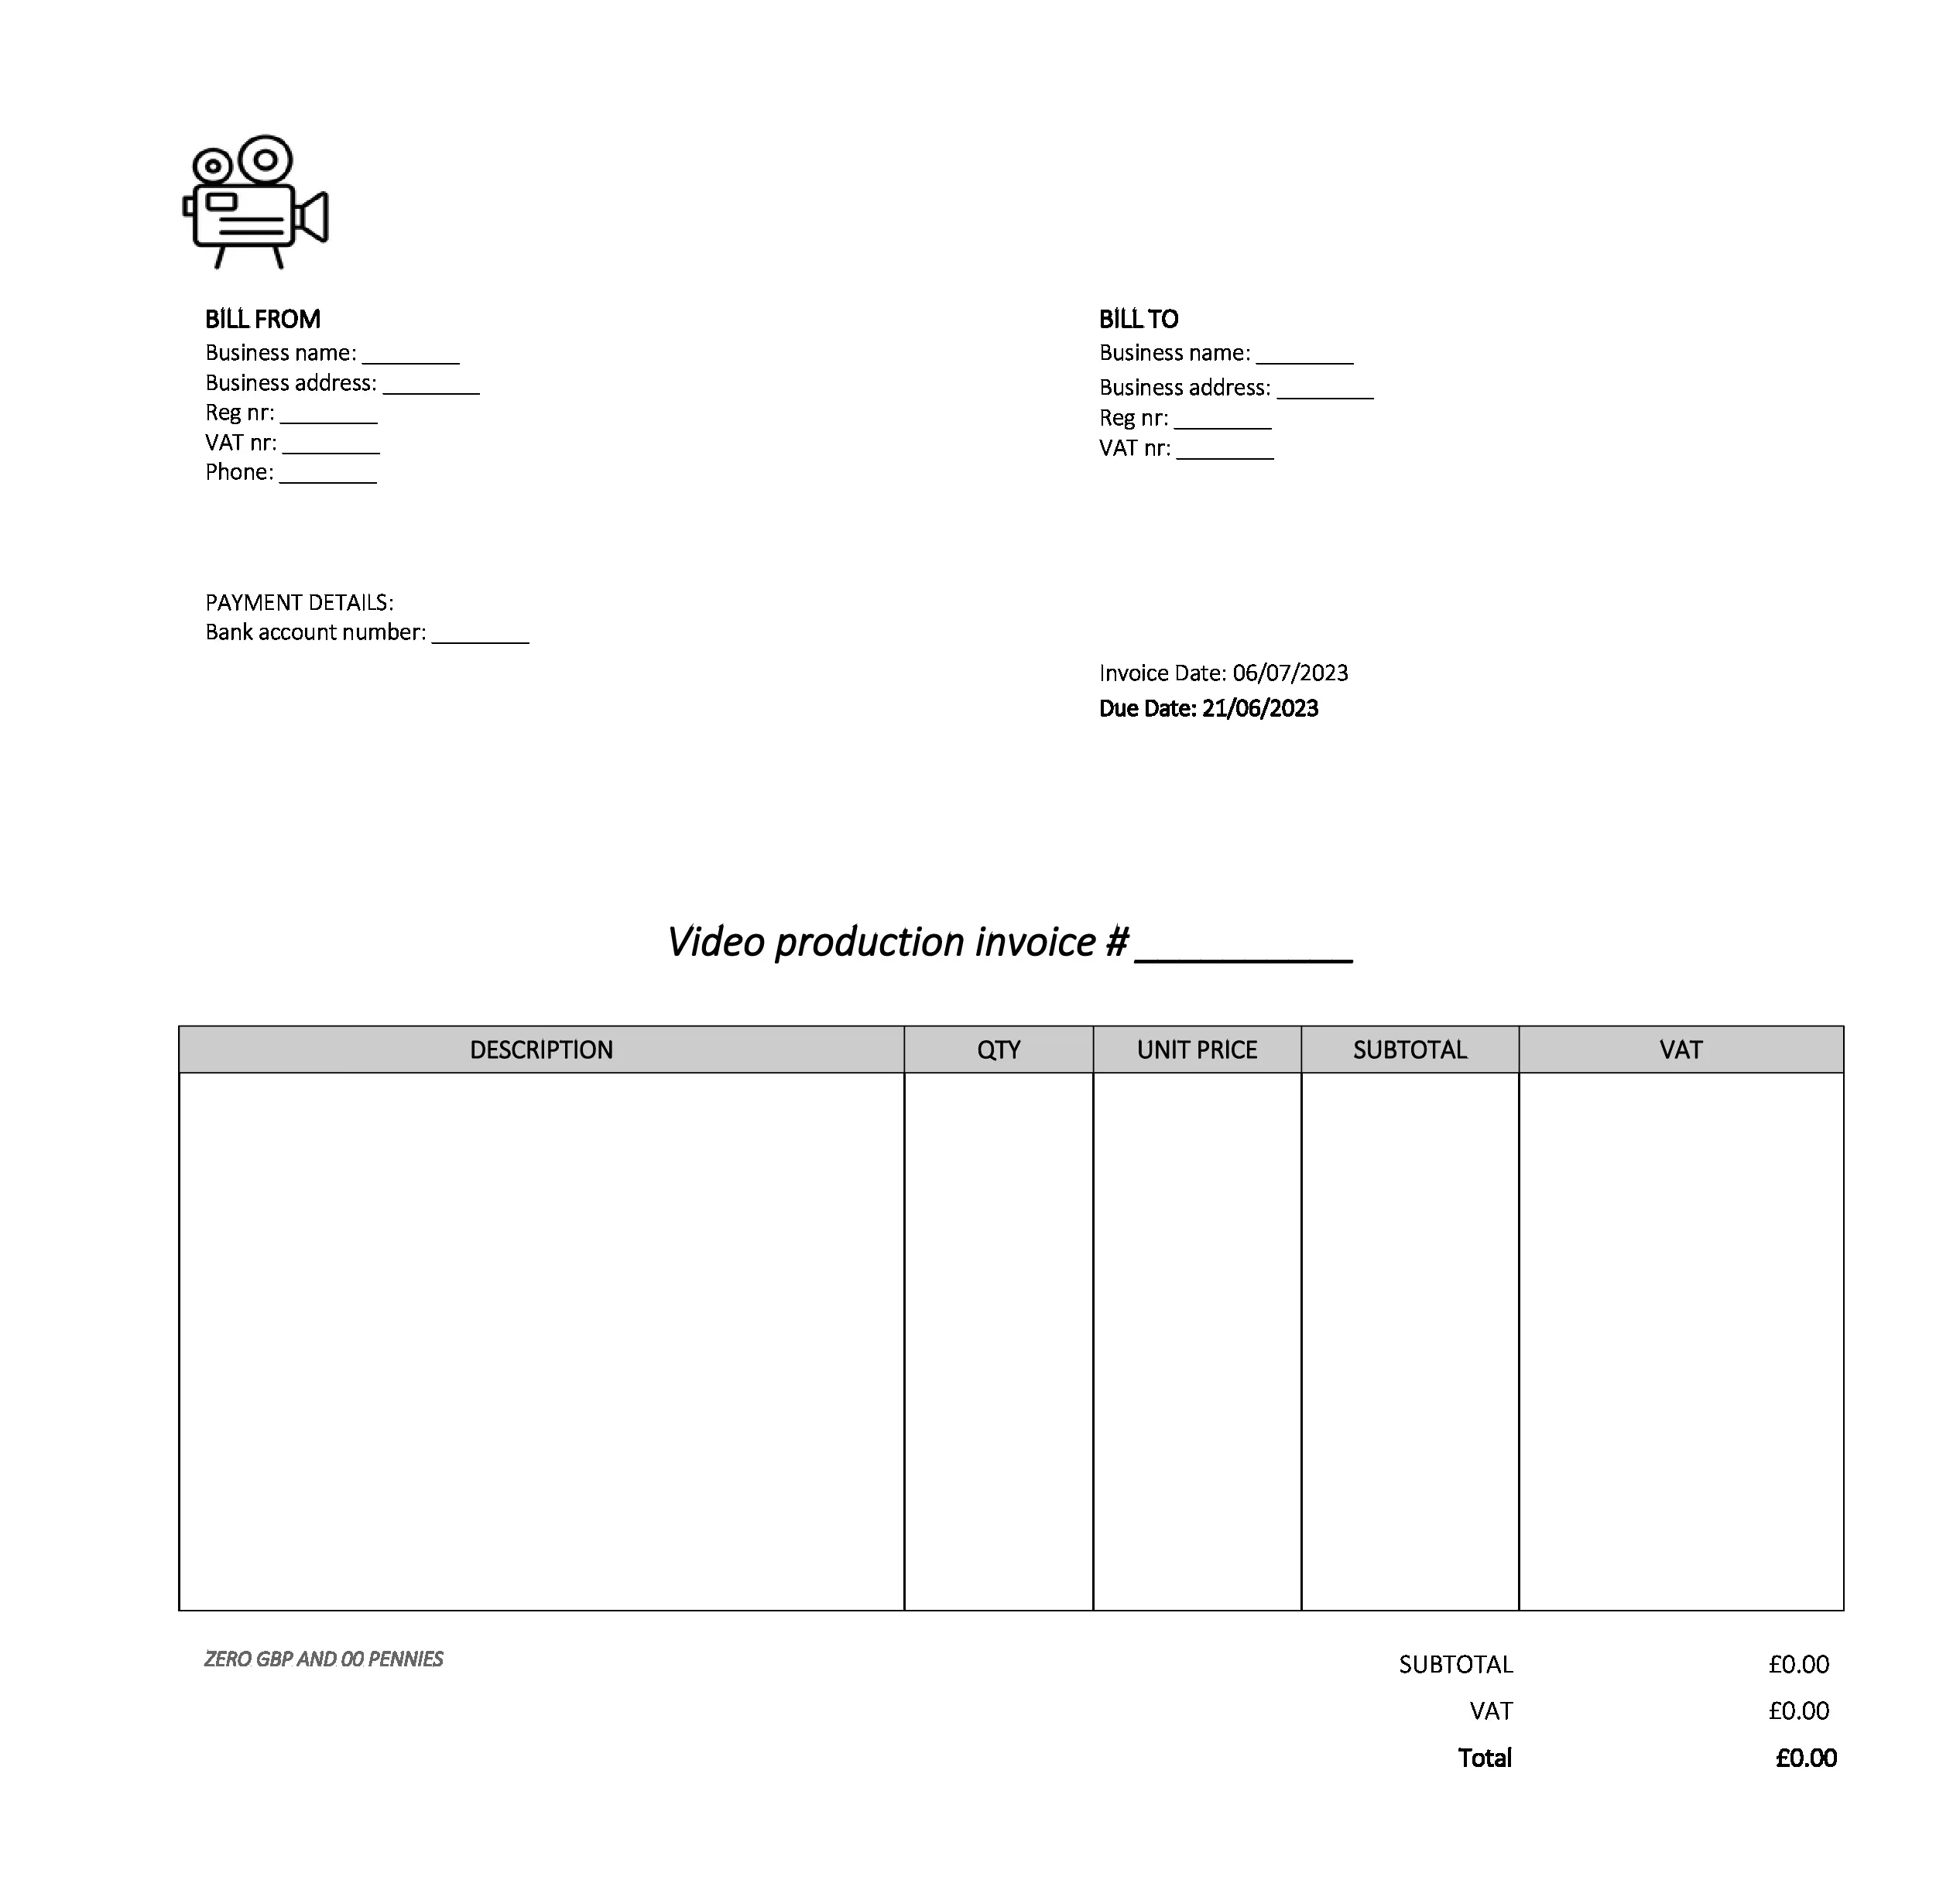 empty video production invoice template UK Excel / Google sheets